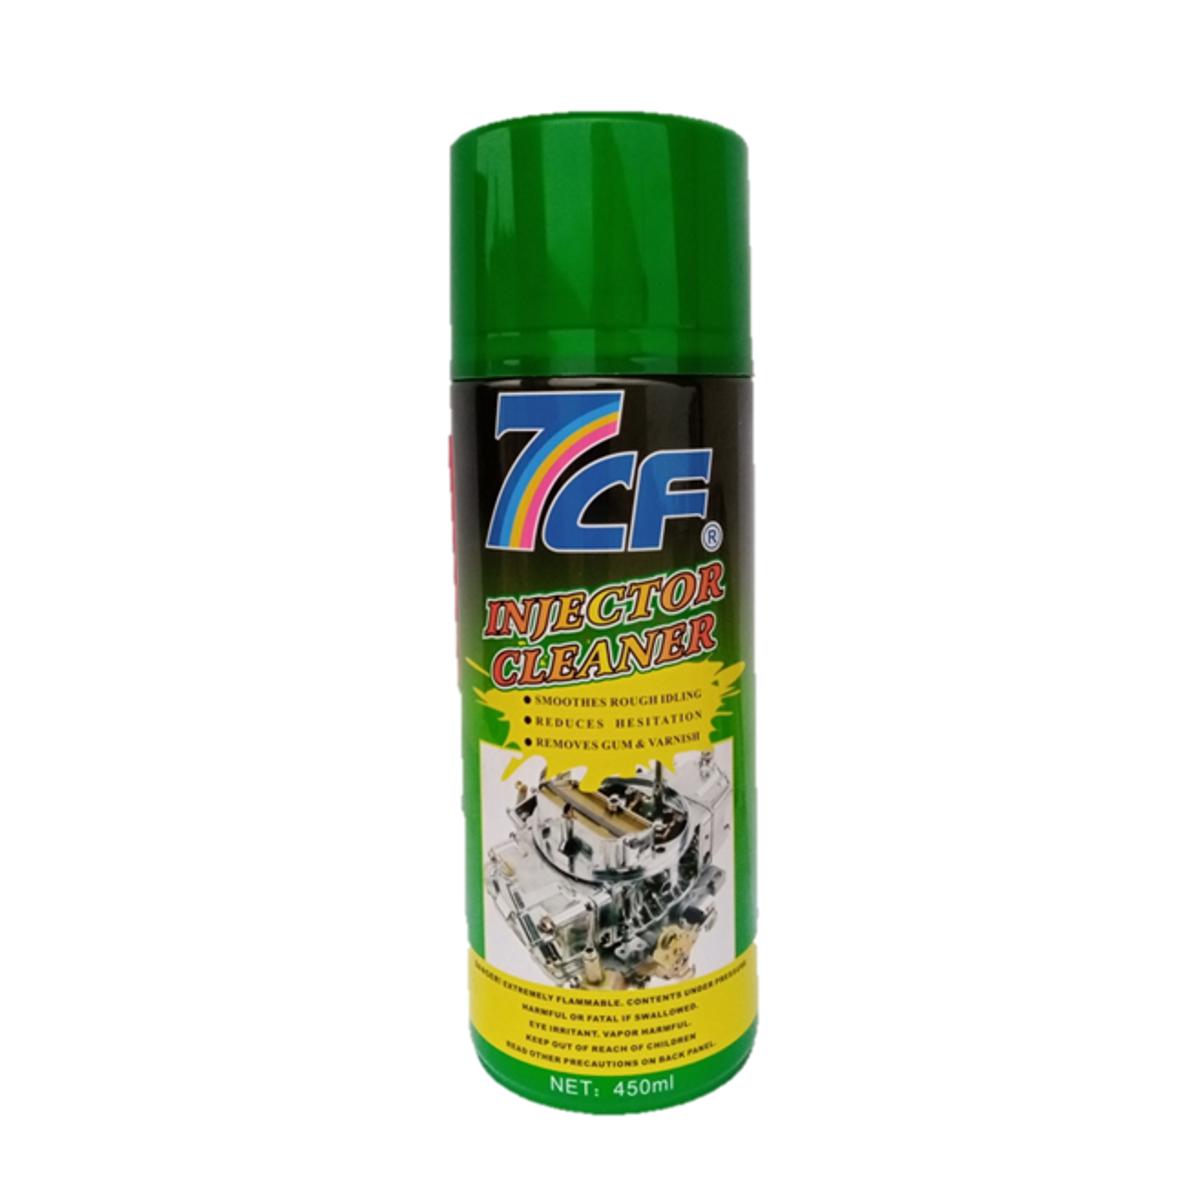 7cF Injector Carb Cleaner (450ml)